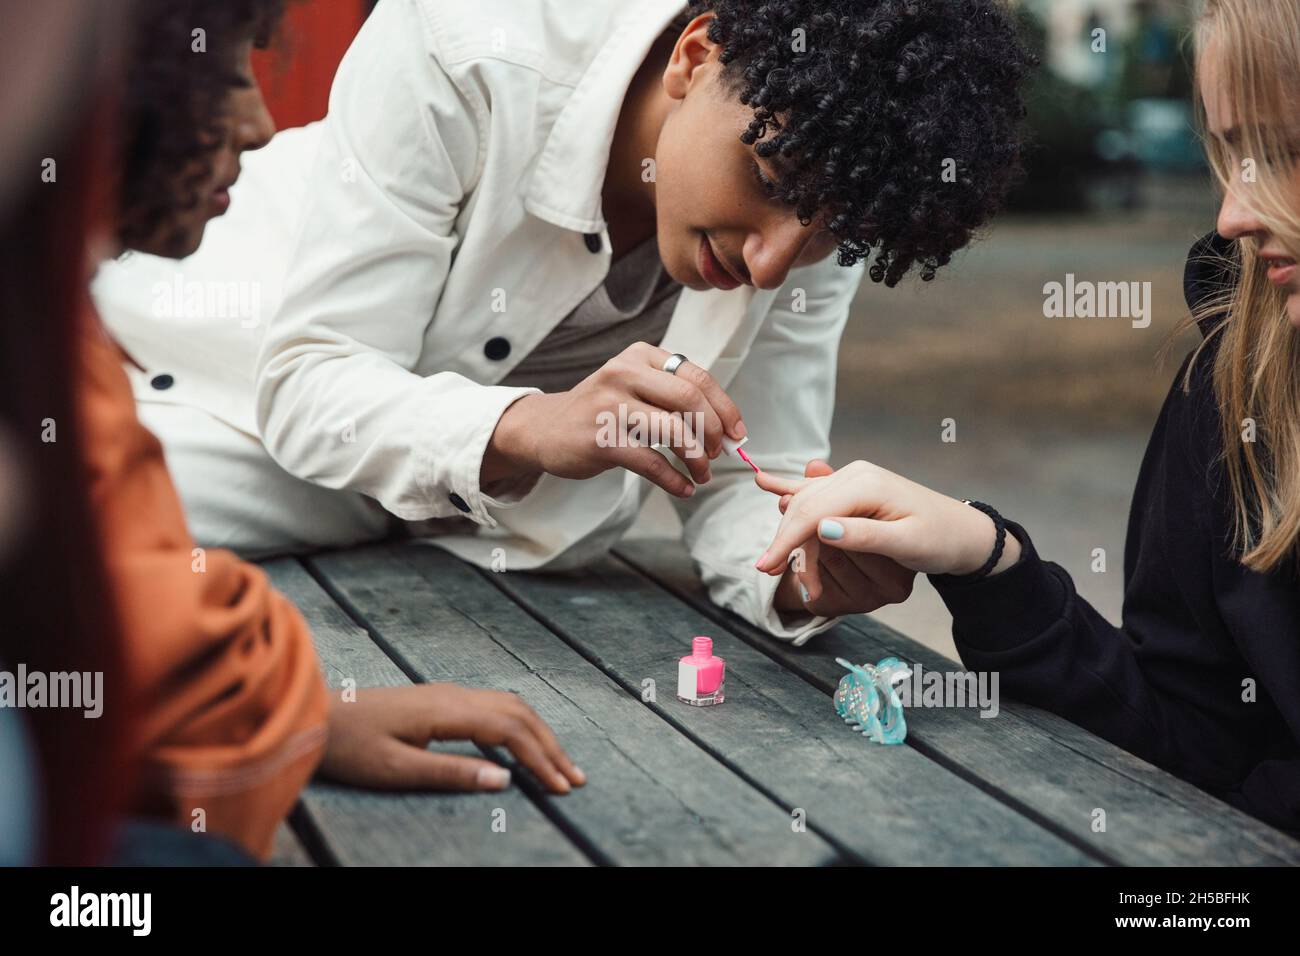 Male teenager applying nail polish to female friend at table Stock Photo